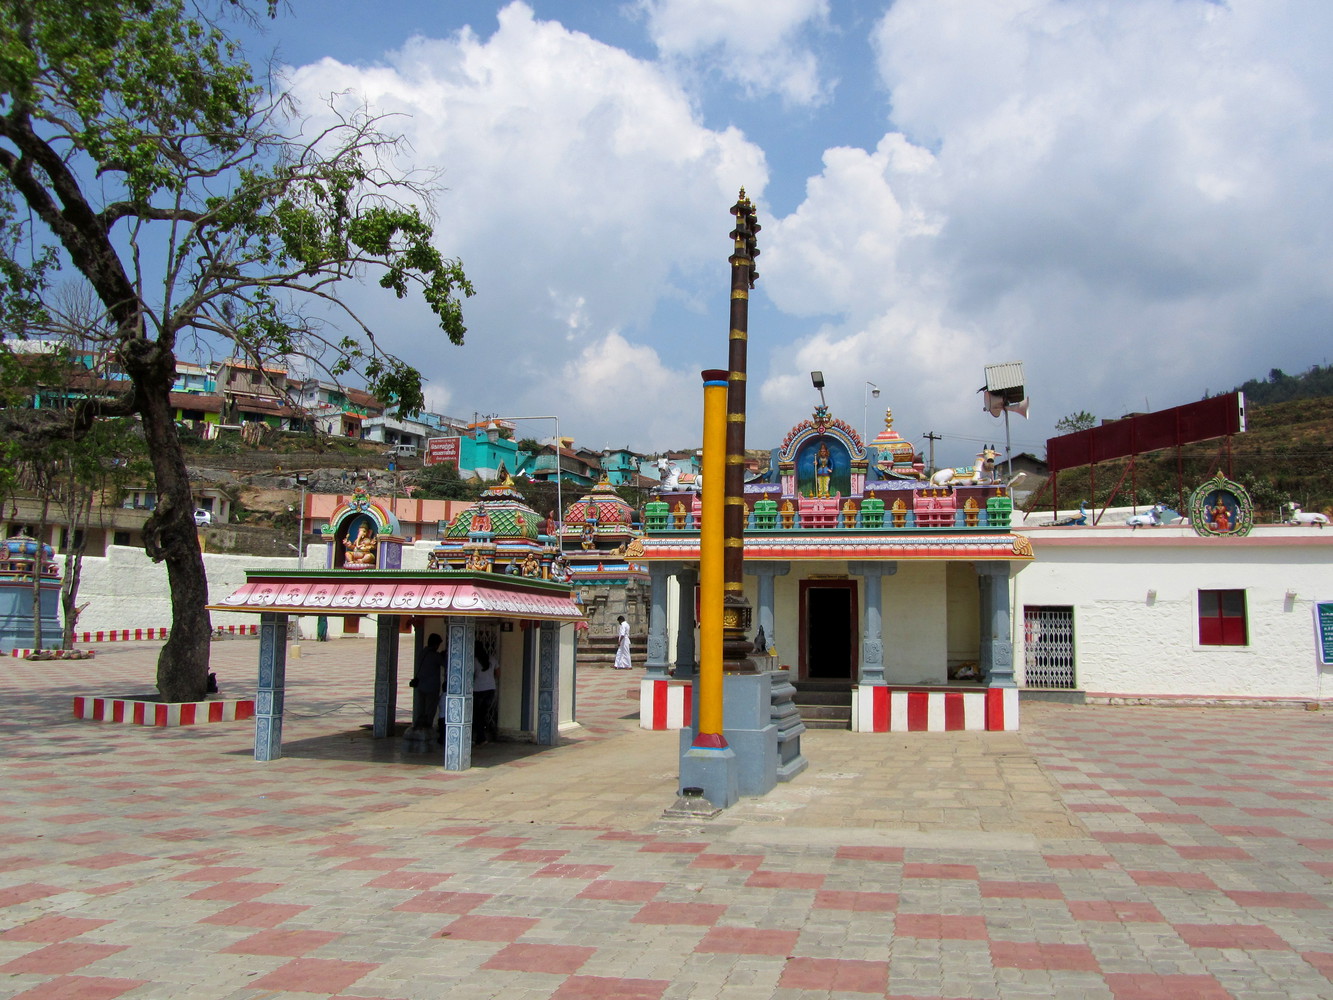 An enclosure of a temple with a pillar, a tree, and checkered floor